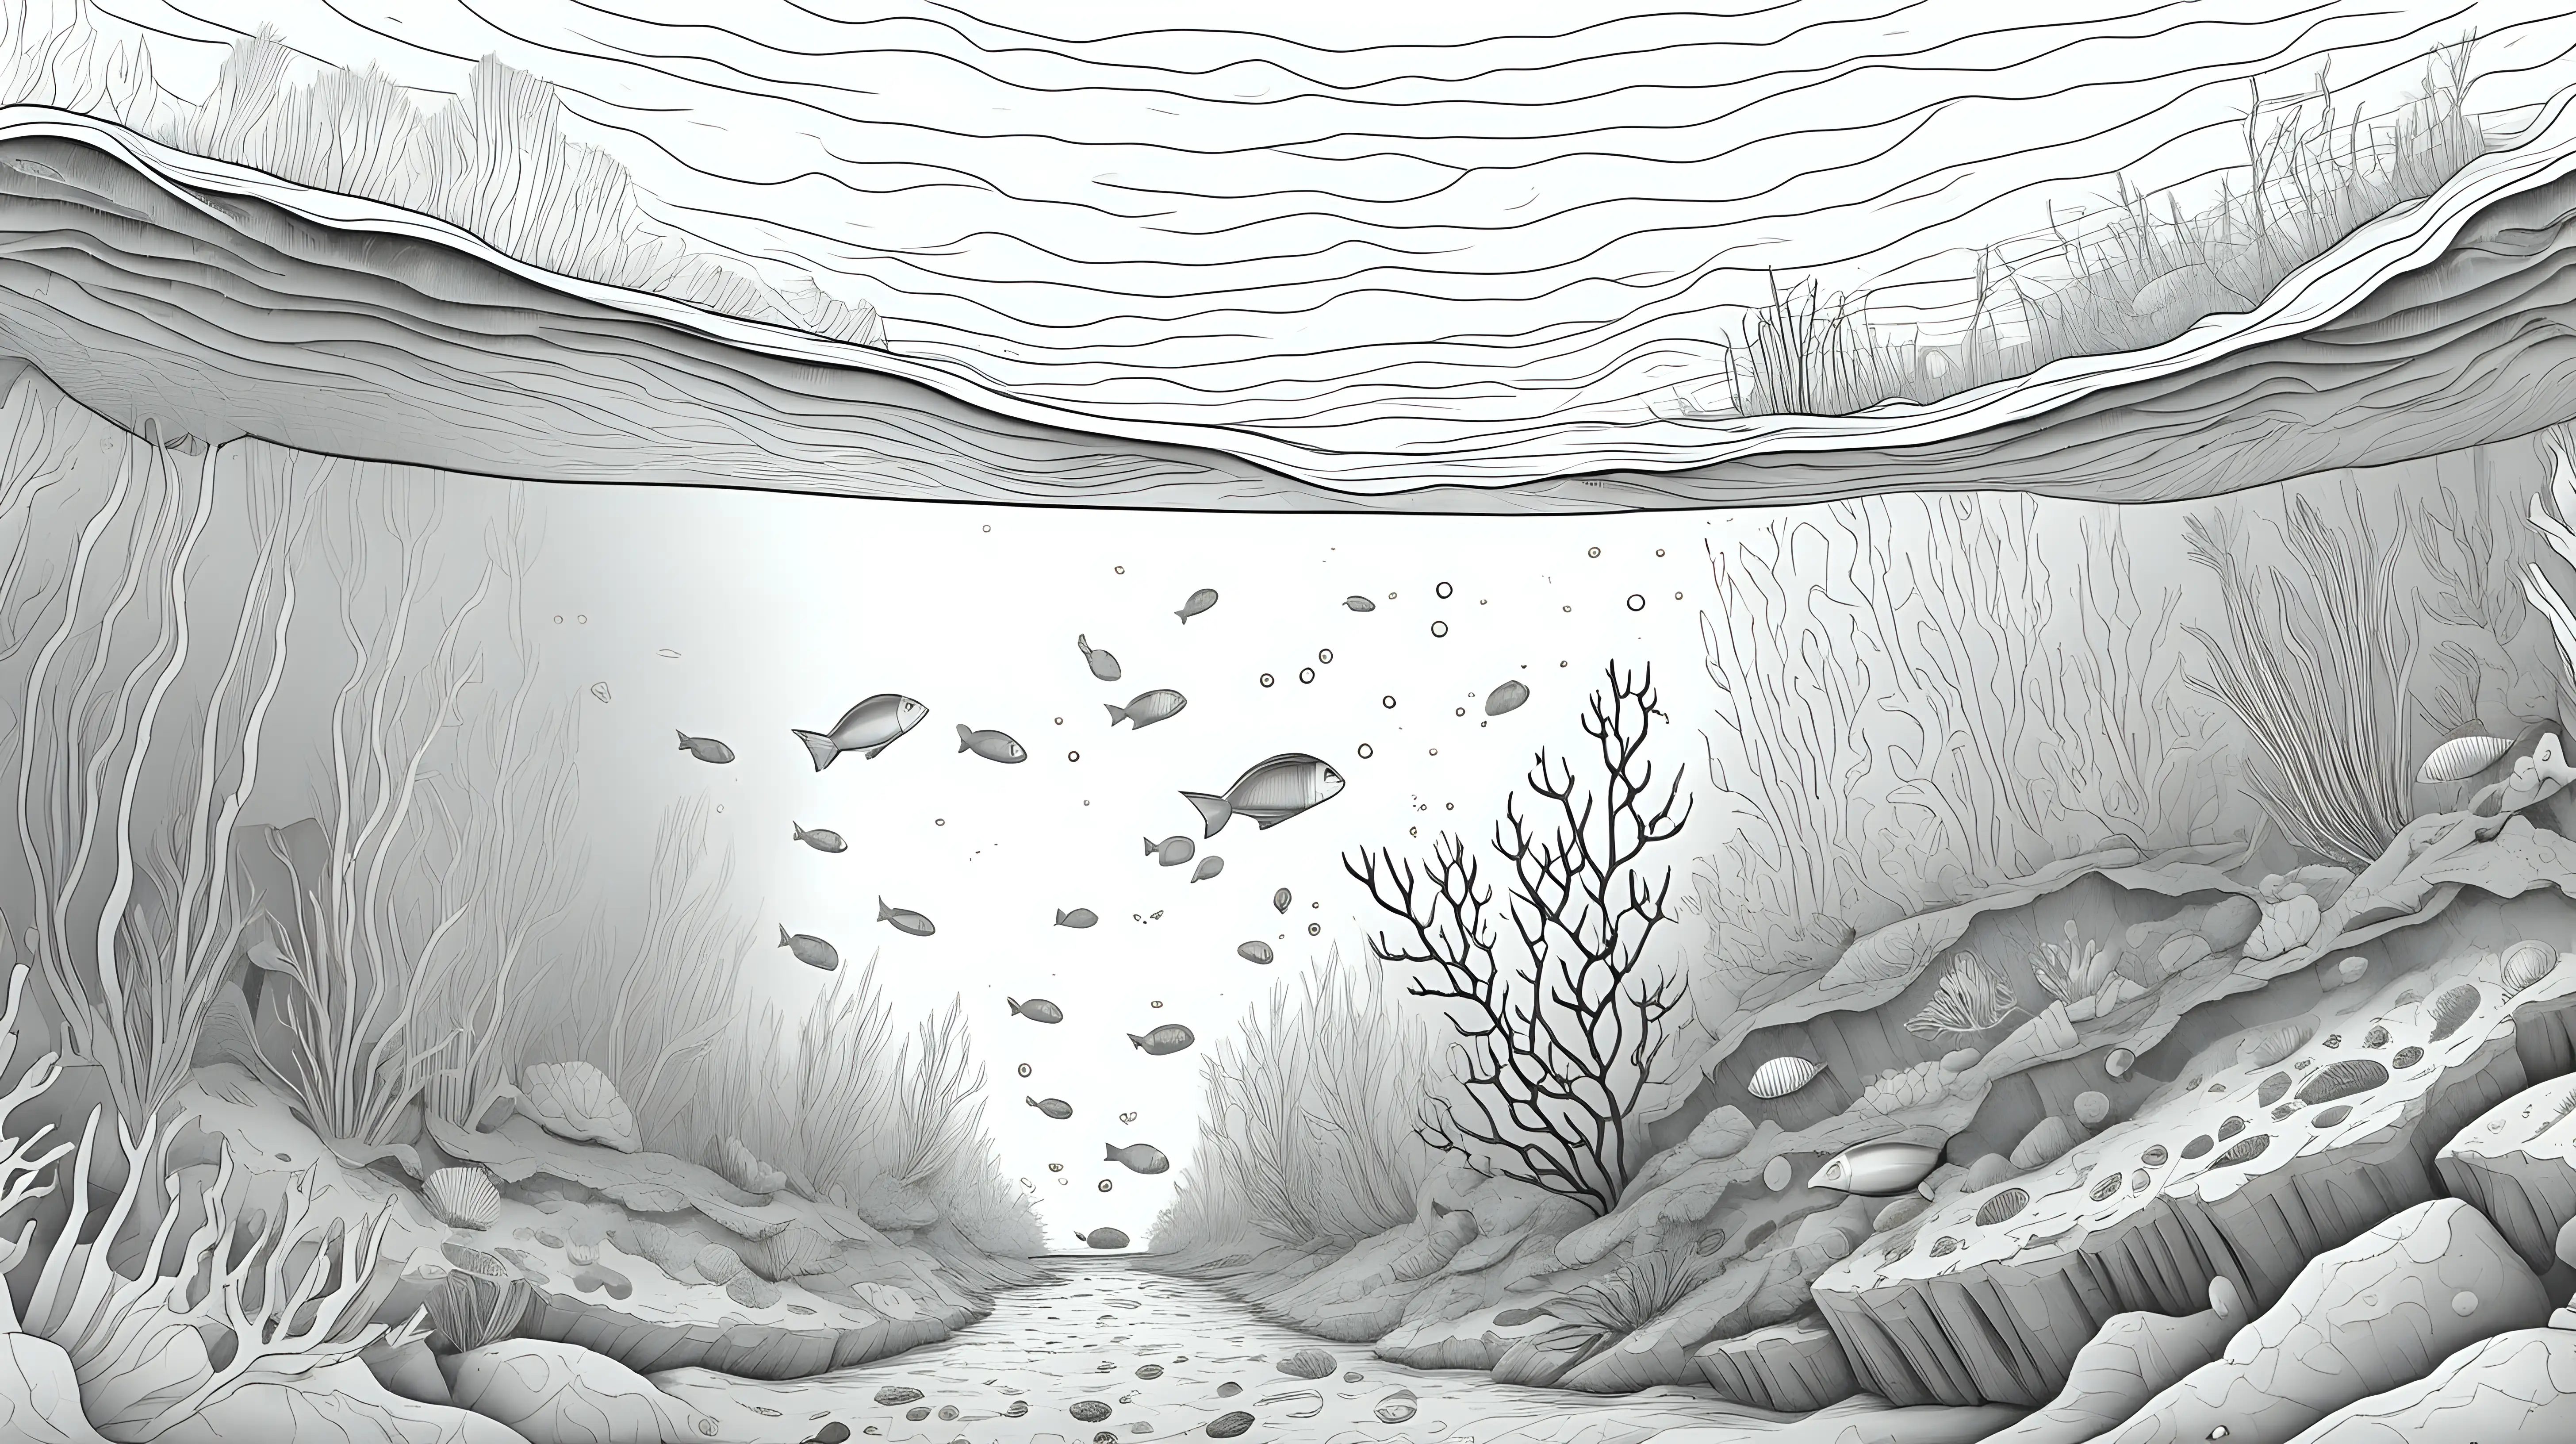 low detail coloring page, underwater view of a sediment settling at the bottom of a river